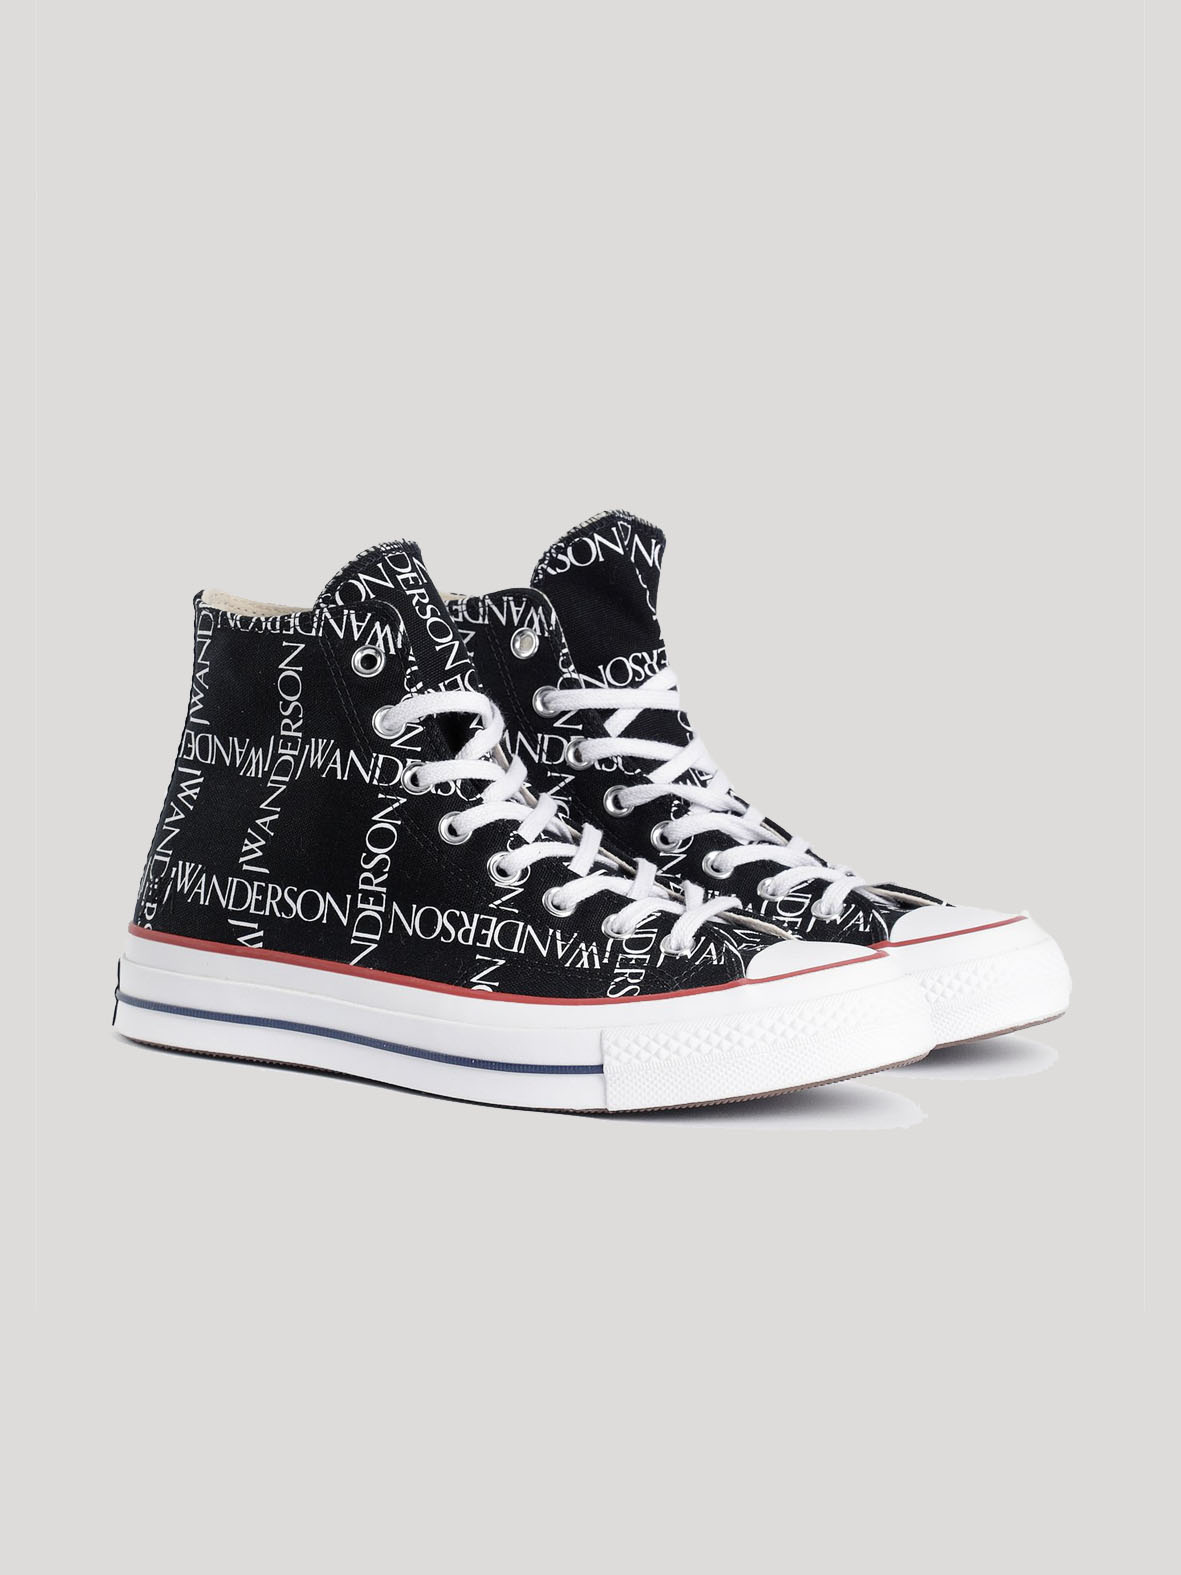 JW Anderson Converse Chuck 70 High Grid Pack Available Now 